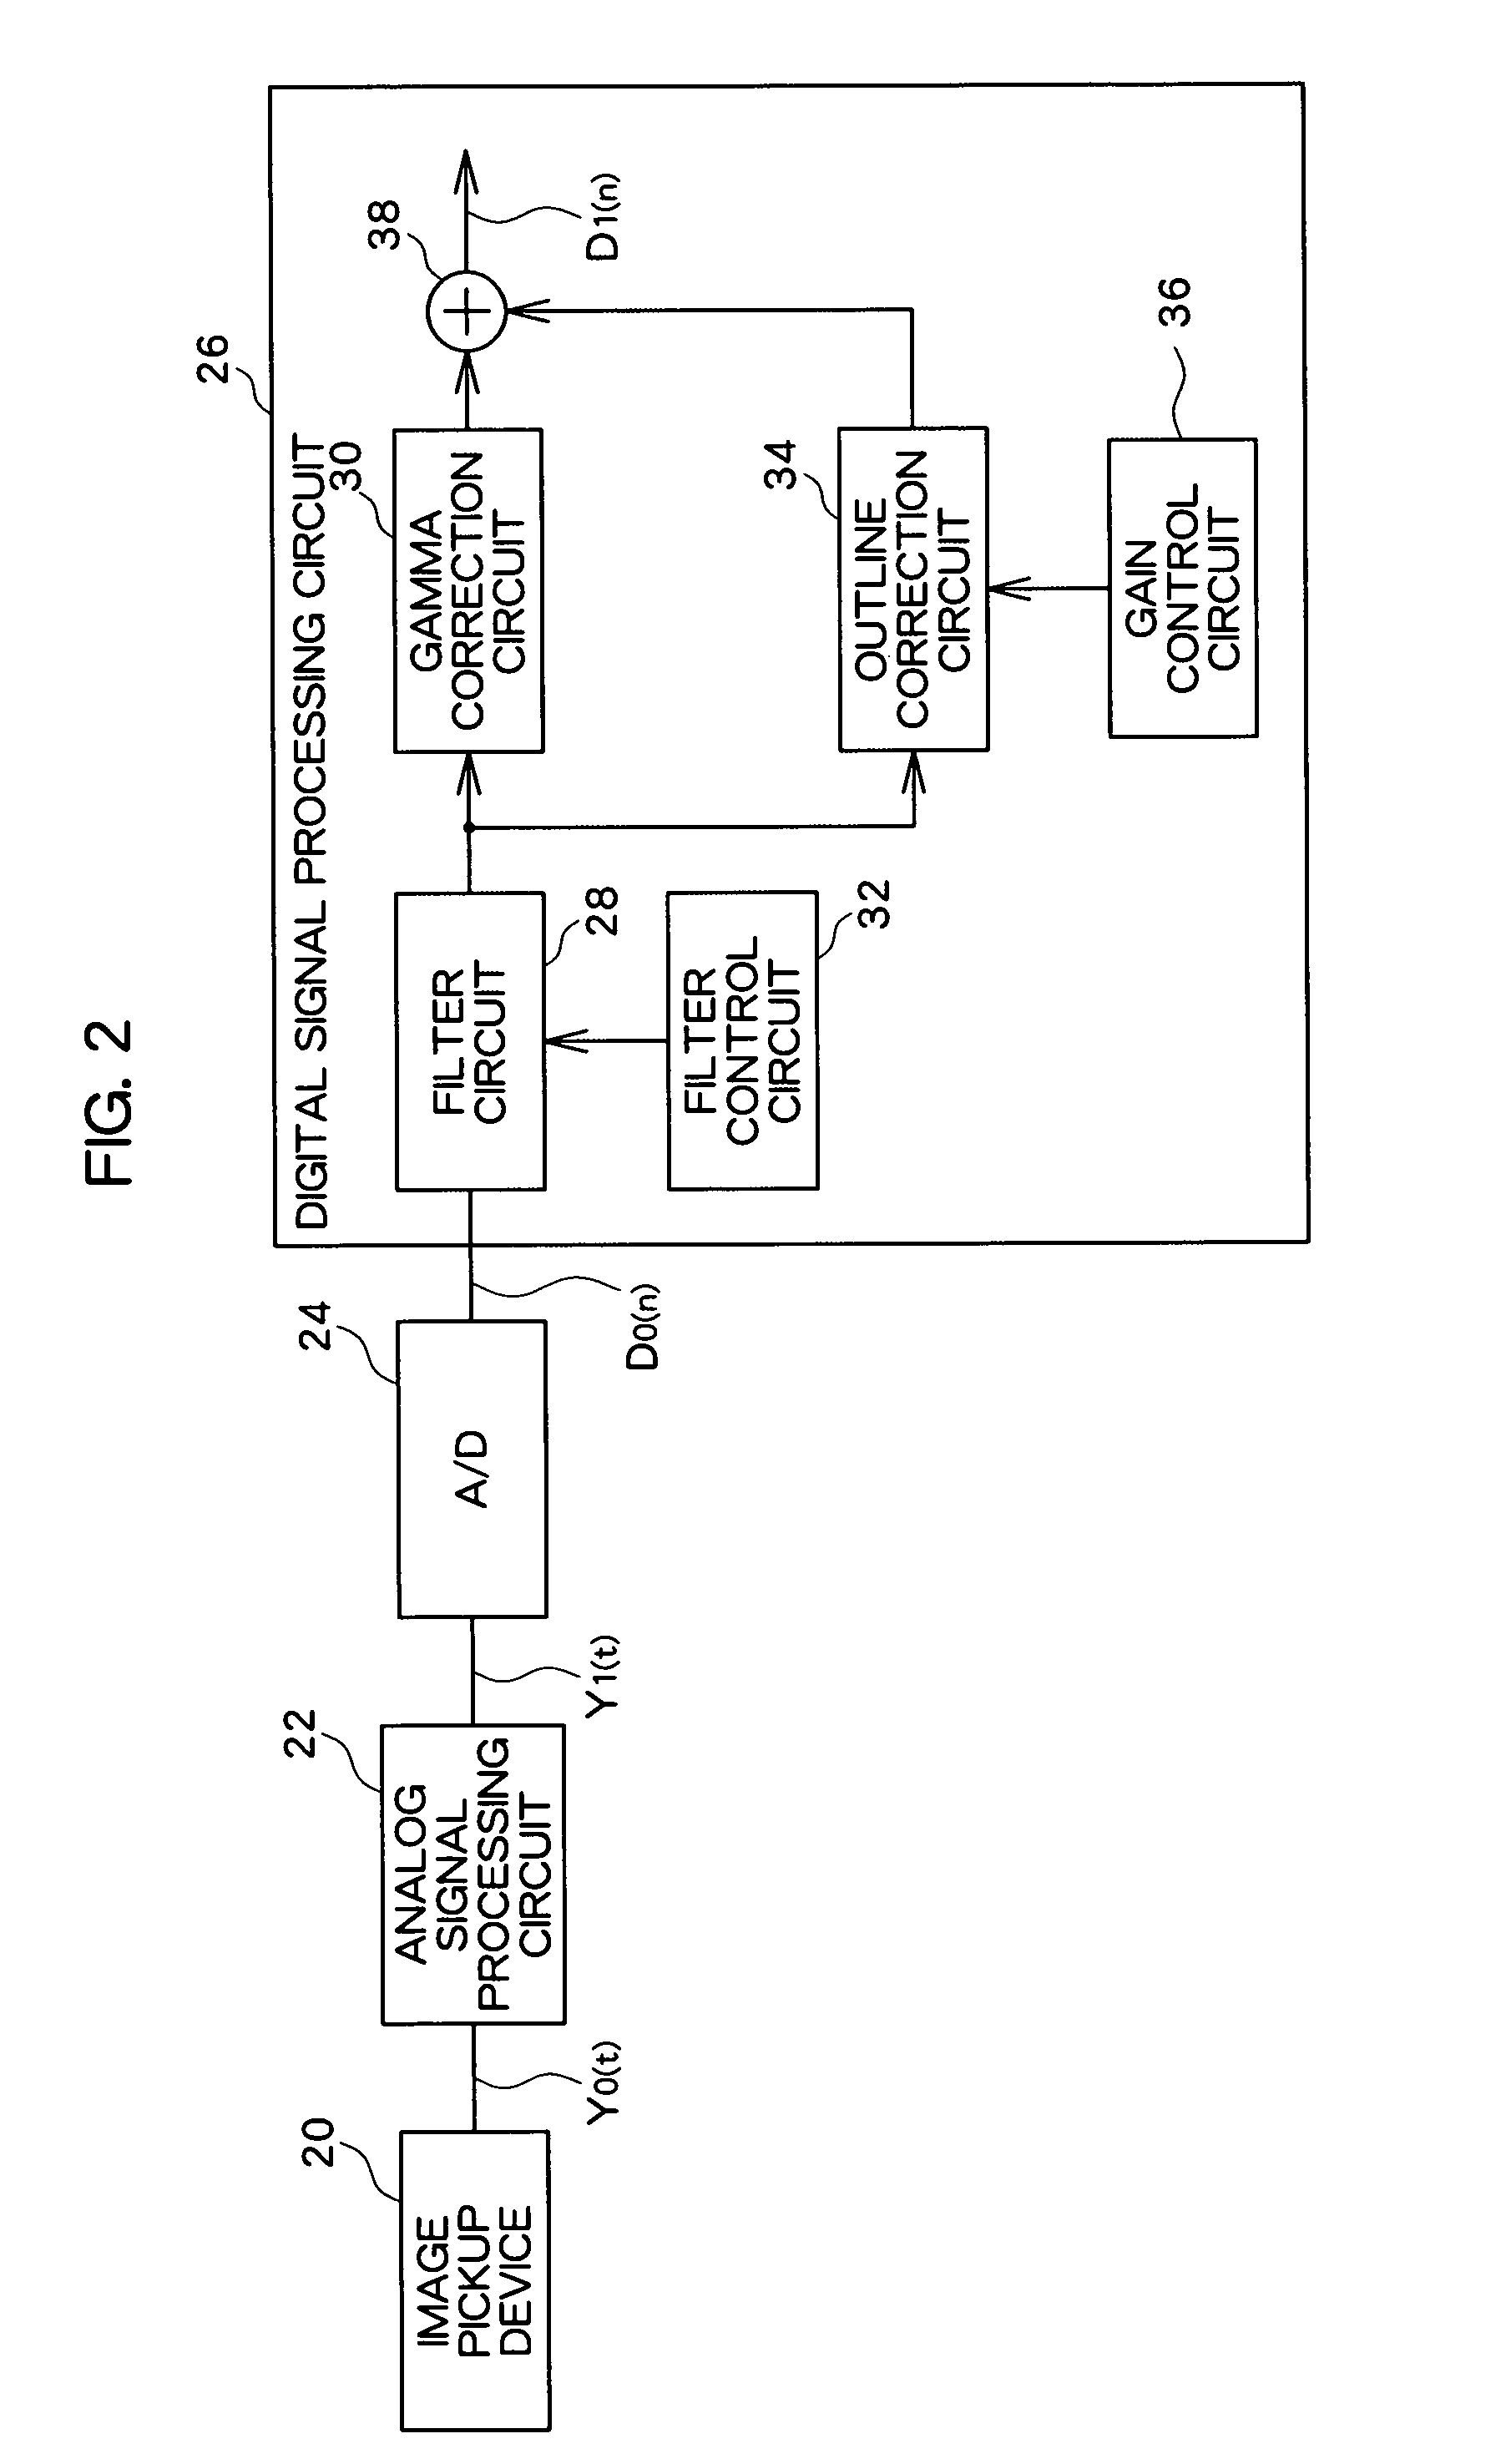 Image signal processing apparatus for setting a noise component attenuation characteristic